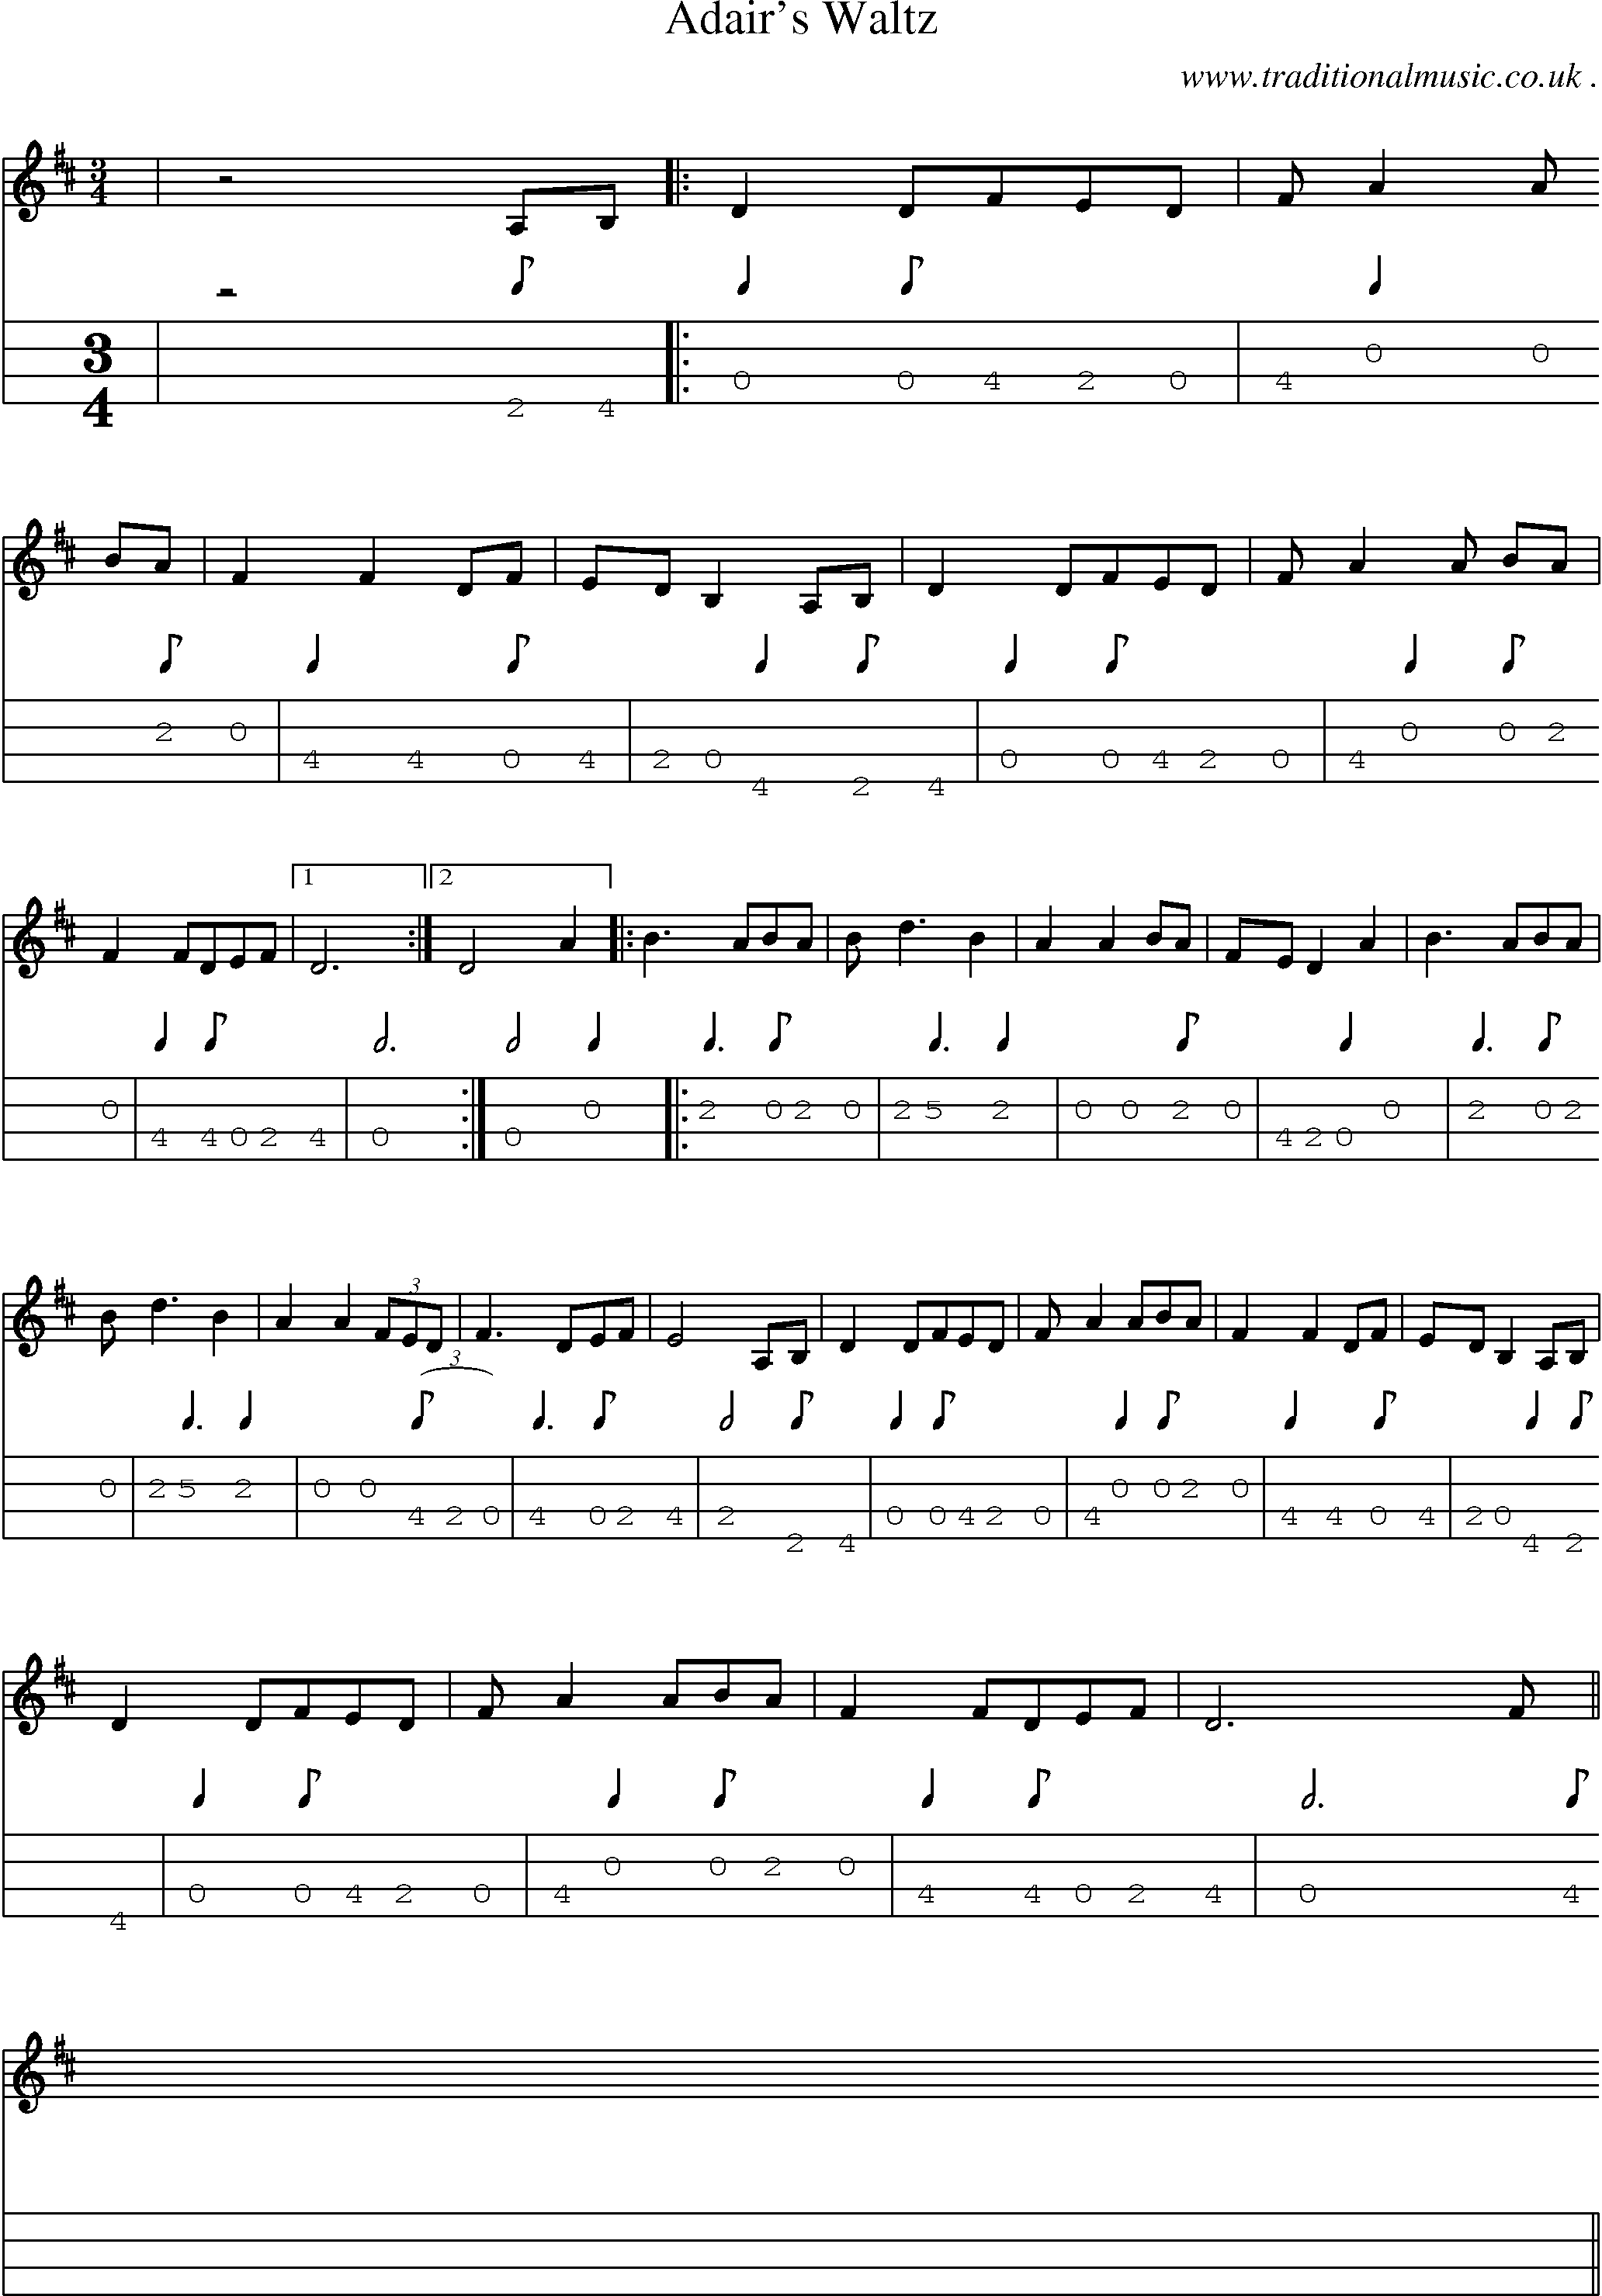 Music Score and Guitar Tabs for Adairs Waltz